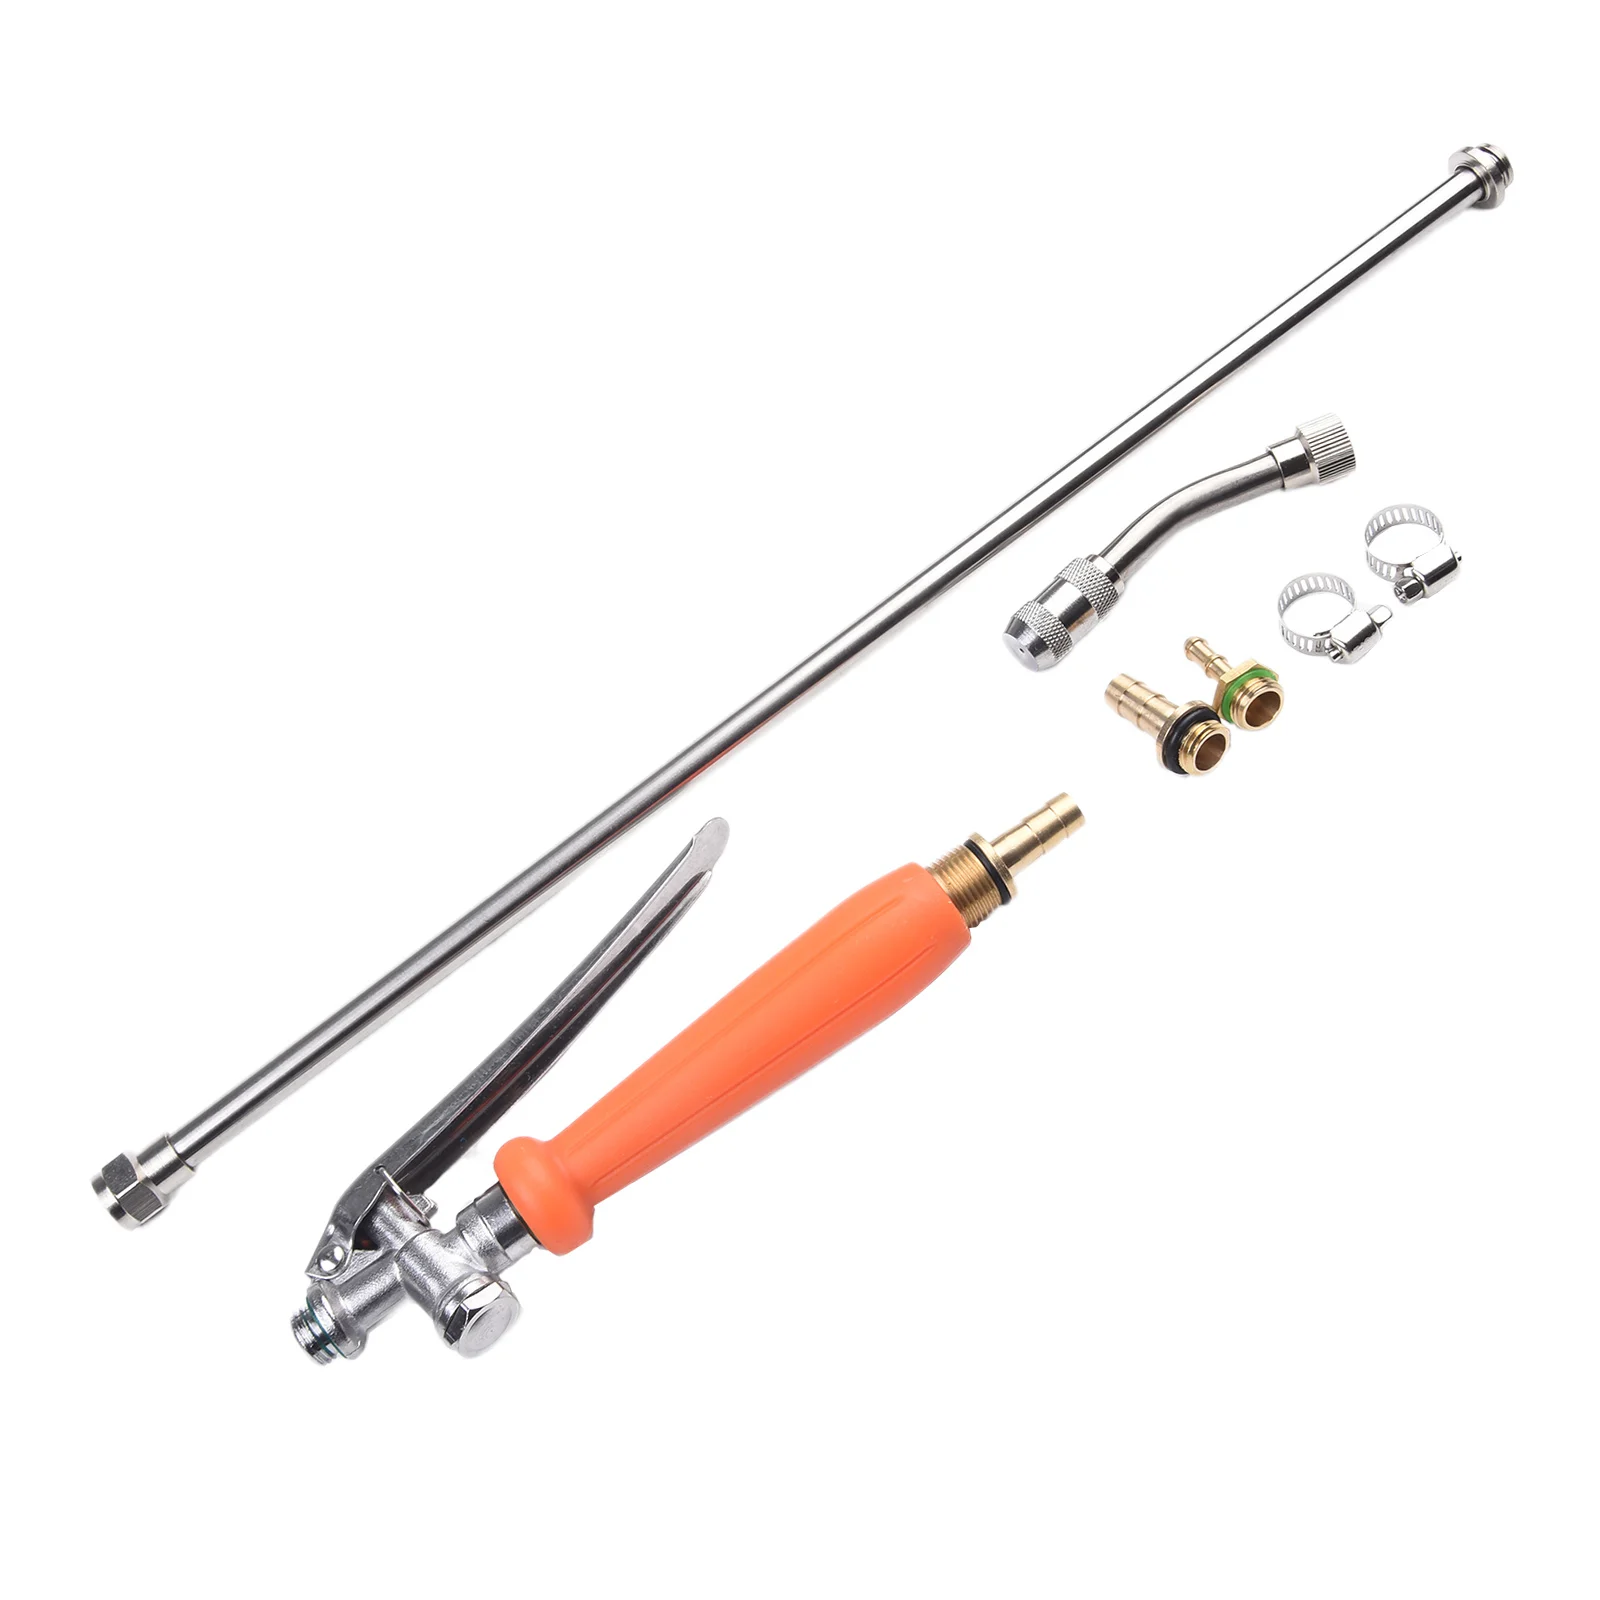 

29 Inch Stainless Steel Sprayer Wand Corrosion resistant Mist/Straight Spray 2 Brass Barbs for Hose Connection